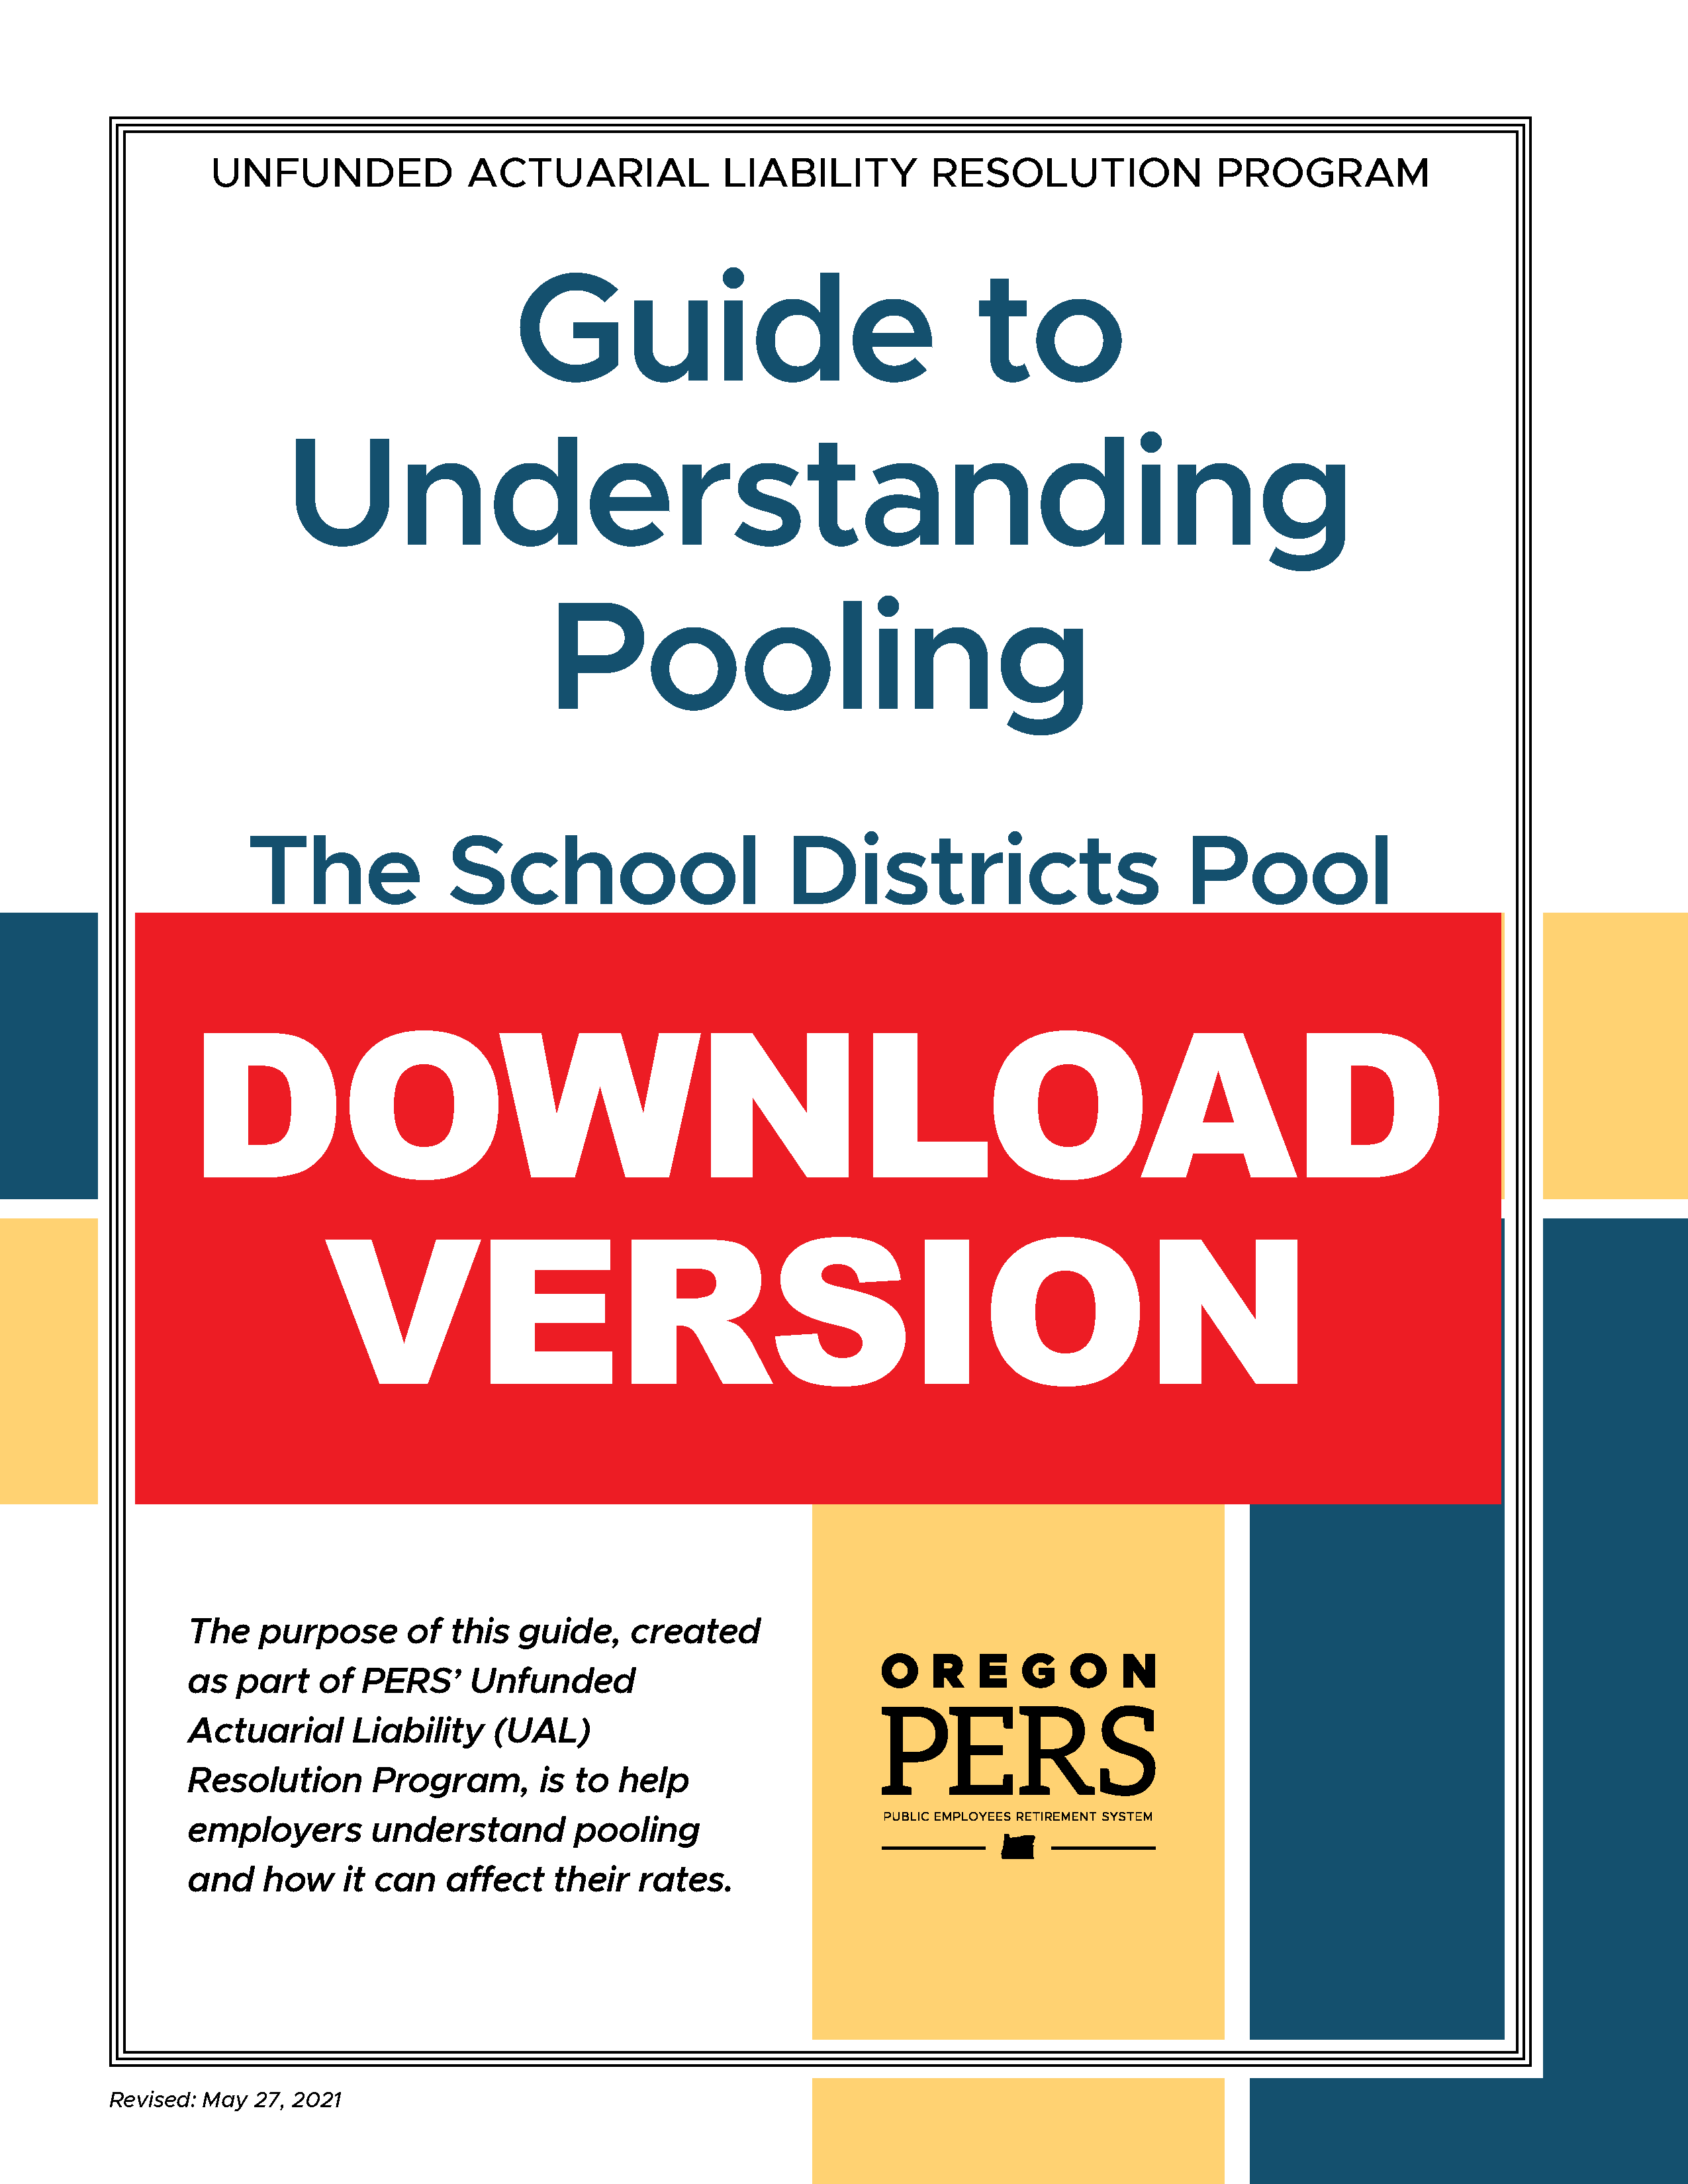 Cover image for PDF document Guide to Understanding Pooling - SDP download version